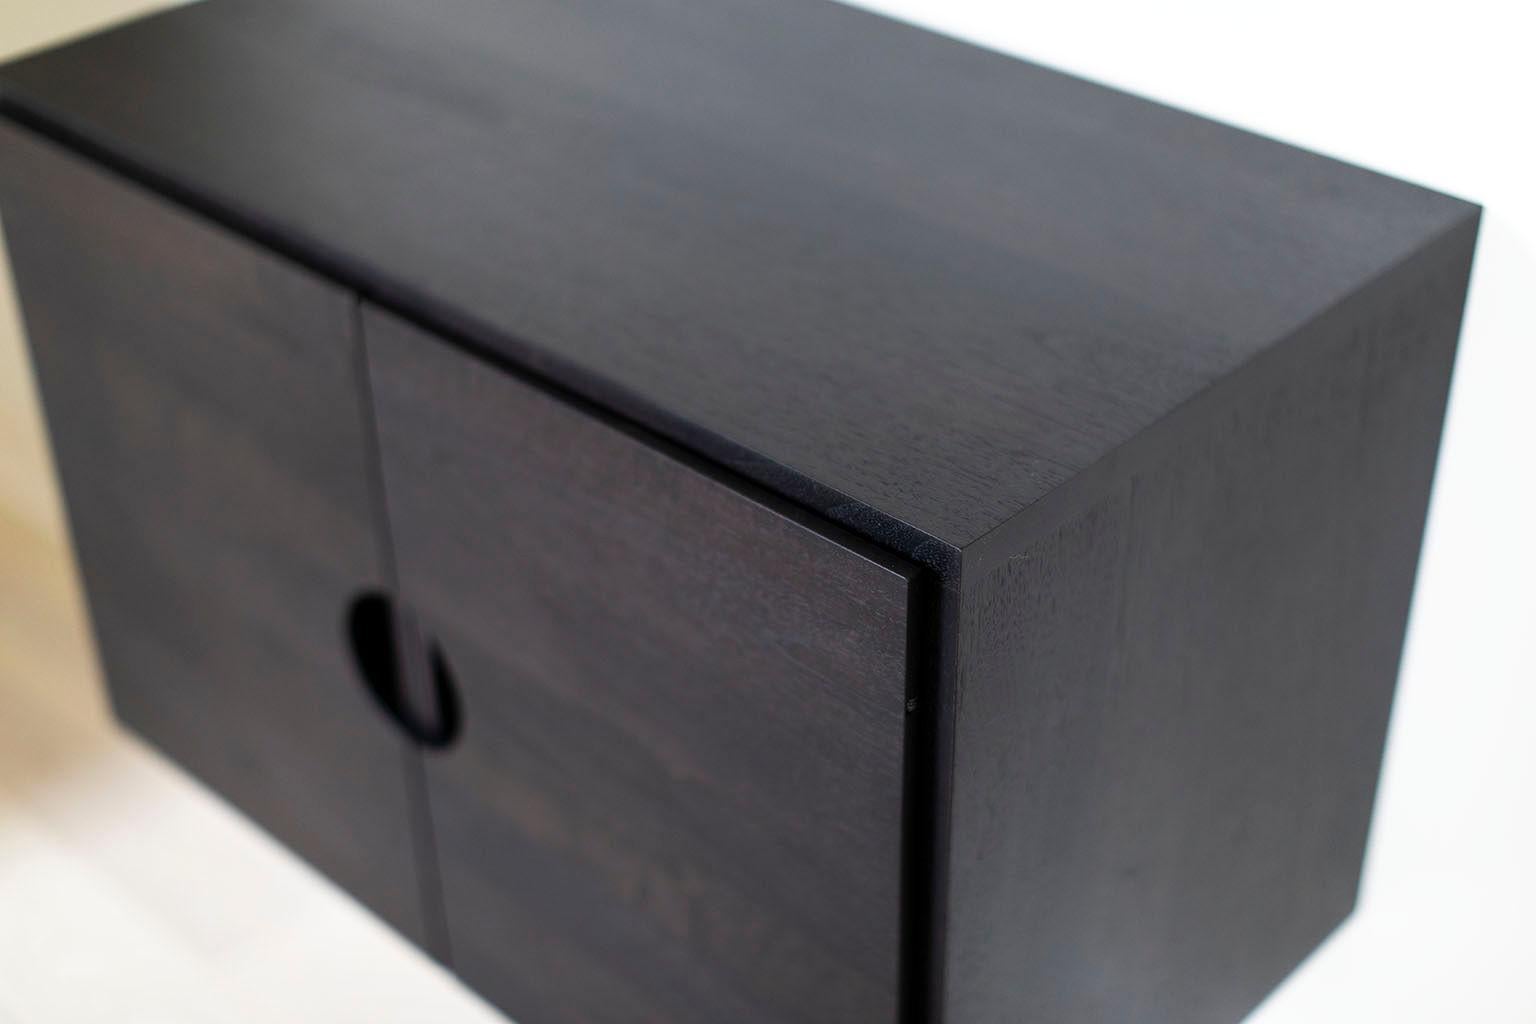 This floating nightstand from the Cali collection is made in the heart of Ohio with locally sourced wood. Each unit is handmade with solid black walnut (or wood of your choice) and finished with a beautiful commercial grade matte finish. The Cali